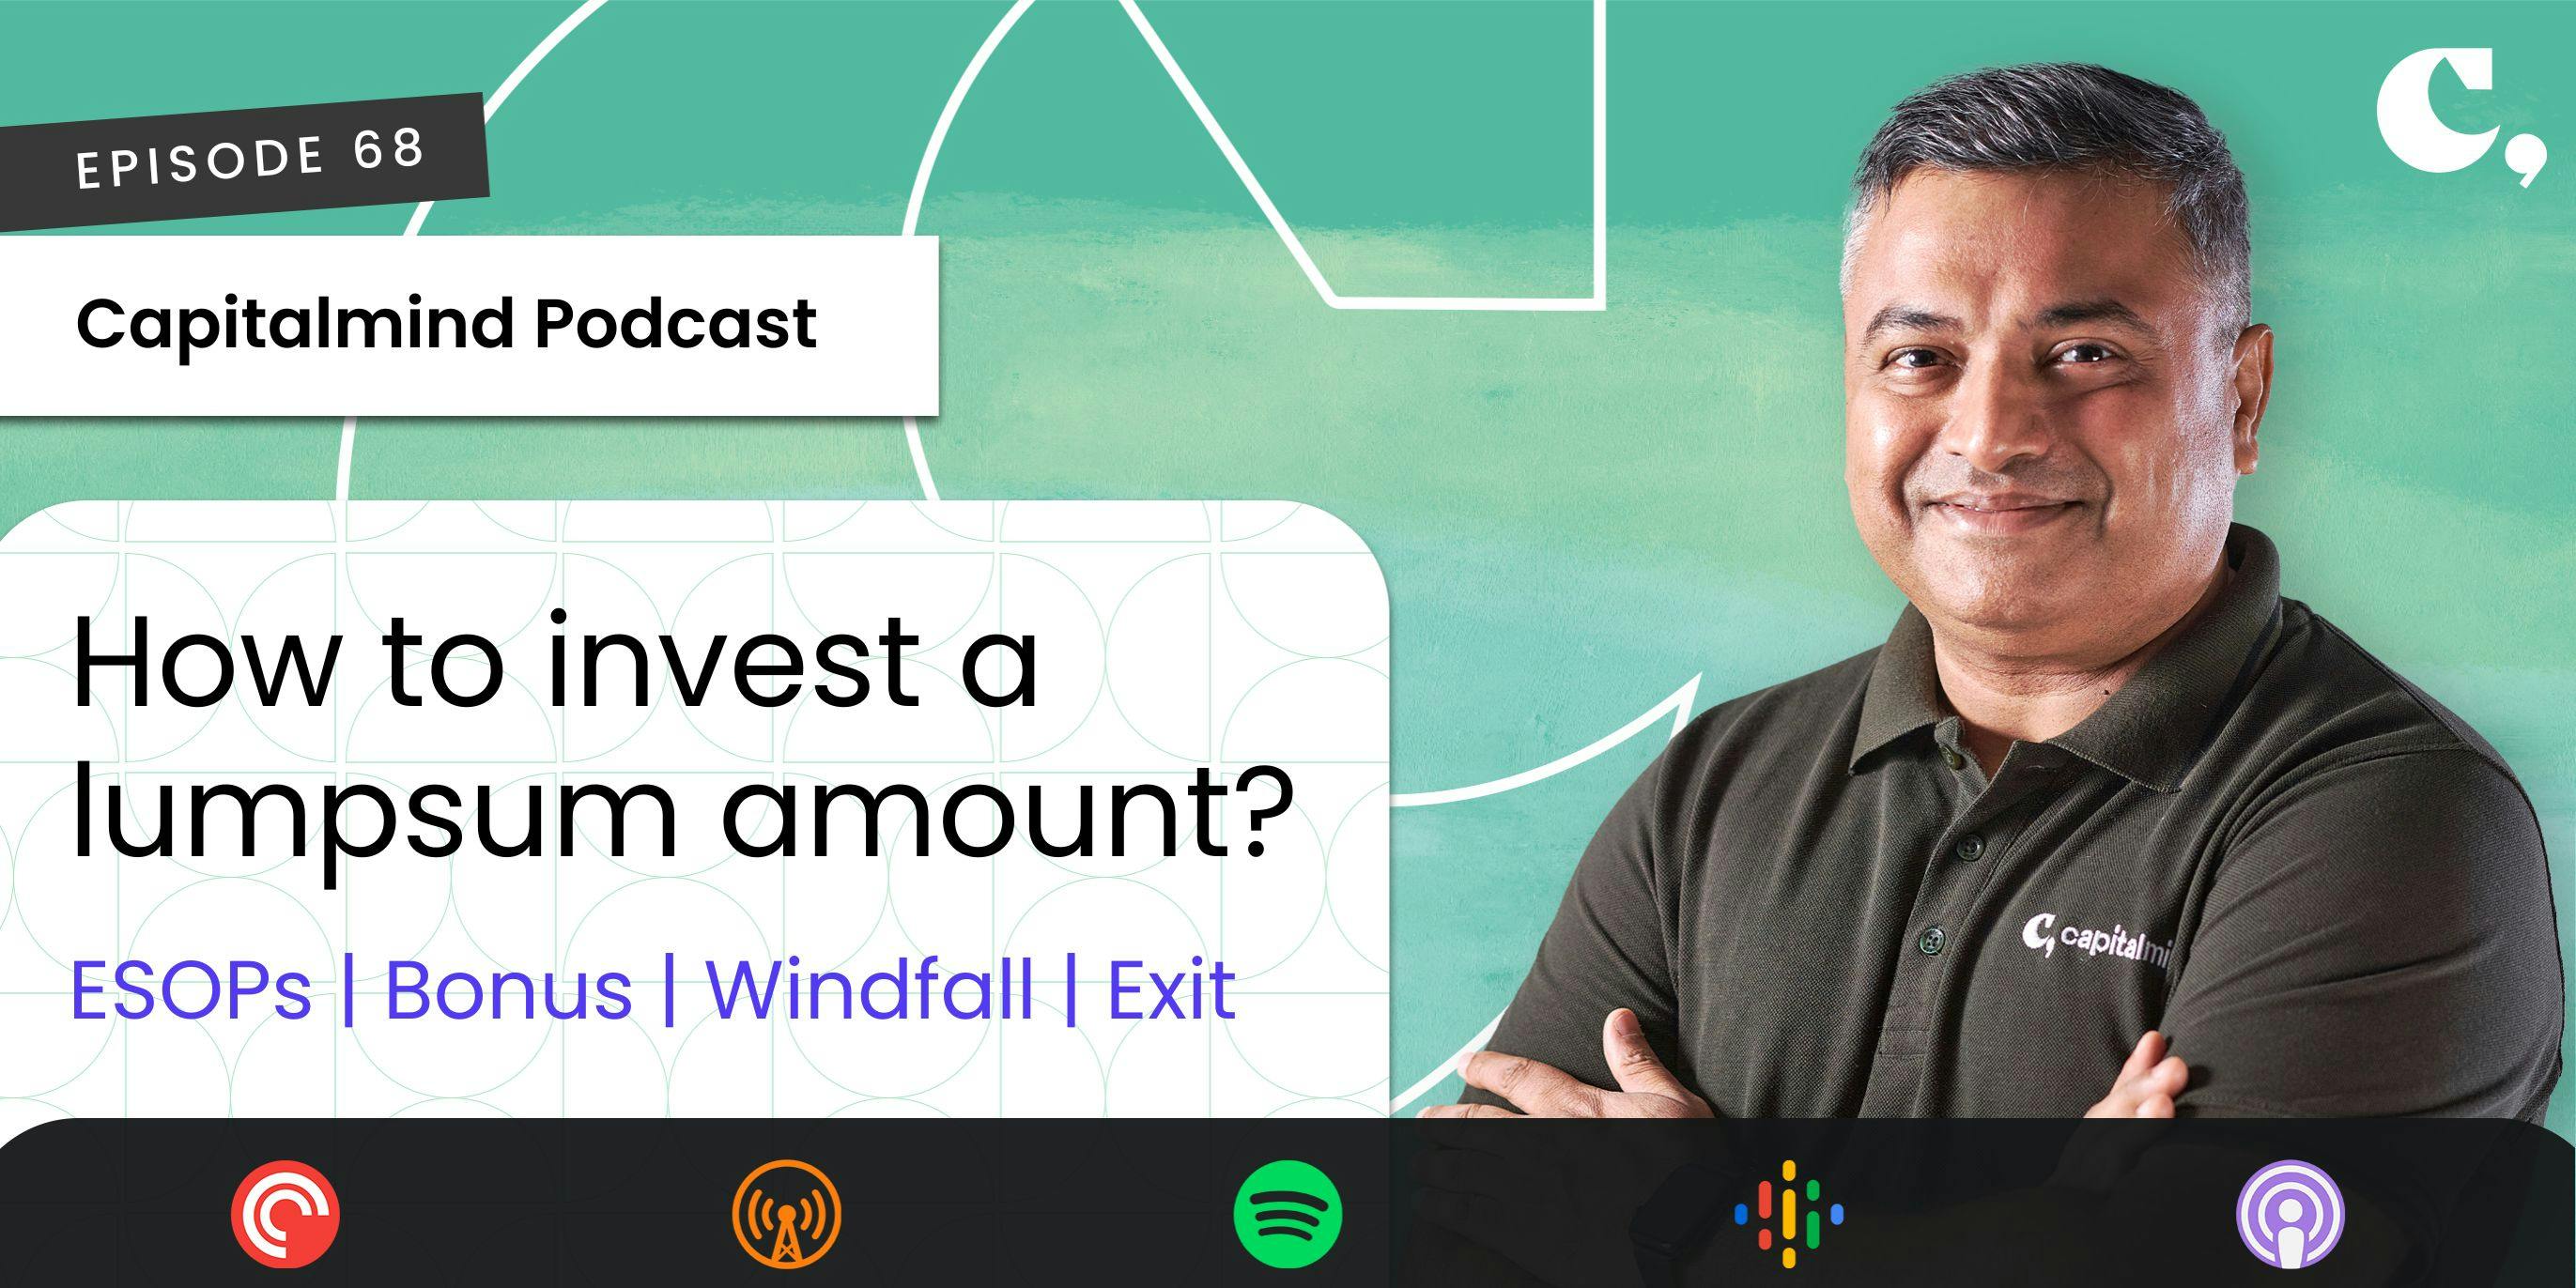 [Podcast] How to invest a lumpsum amount?